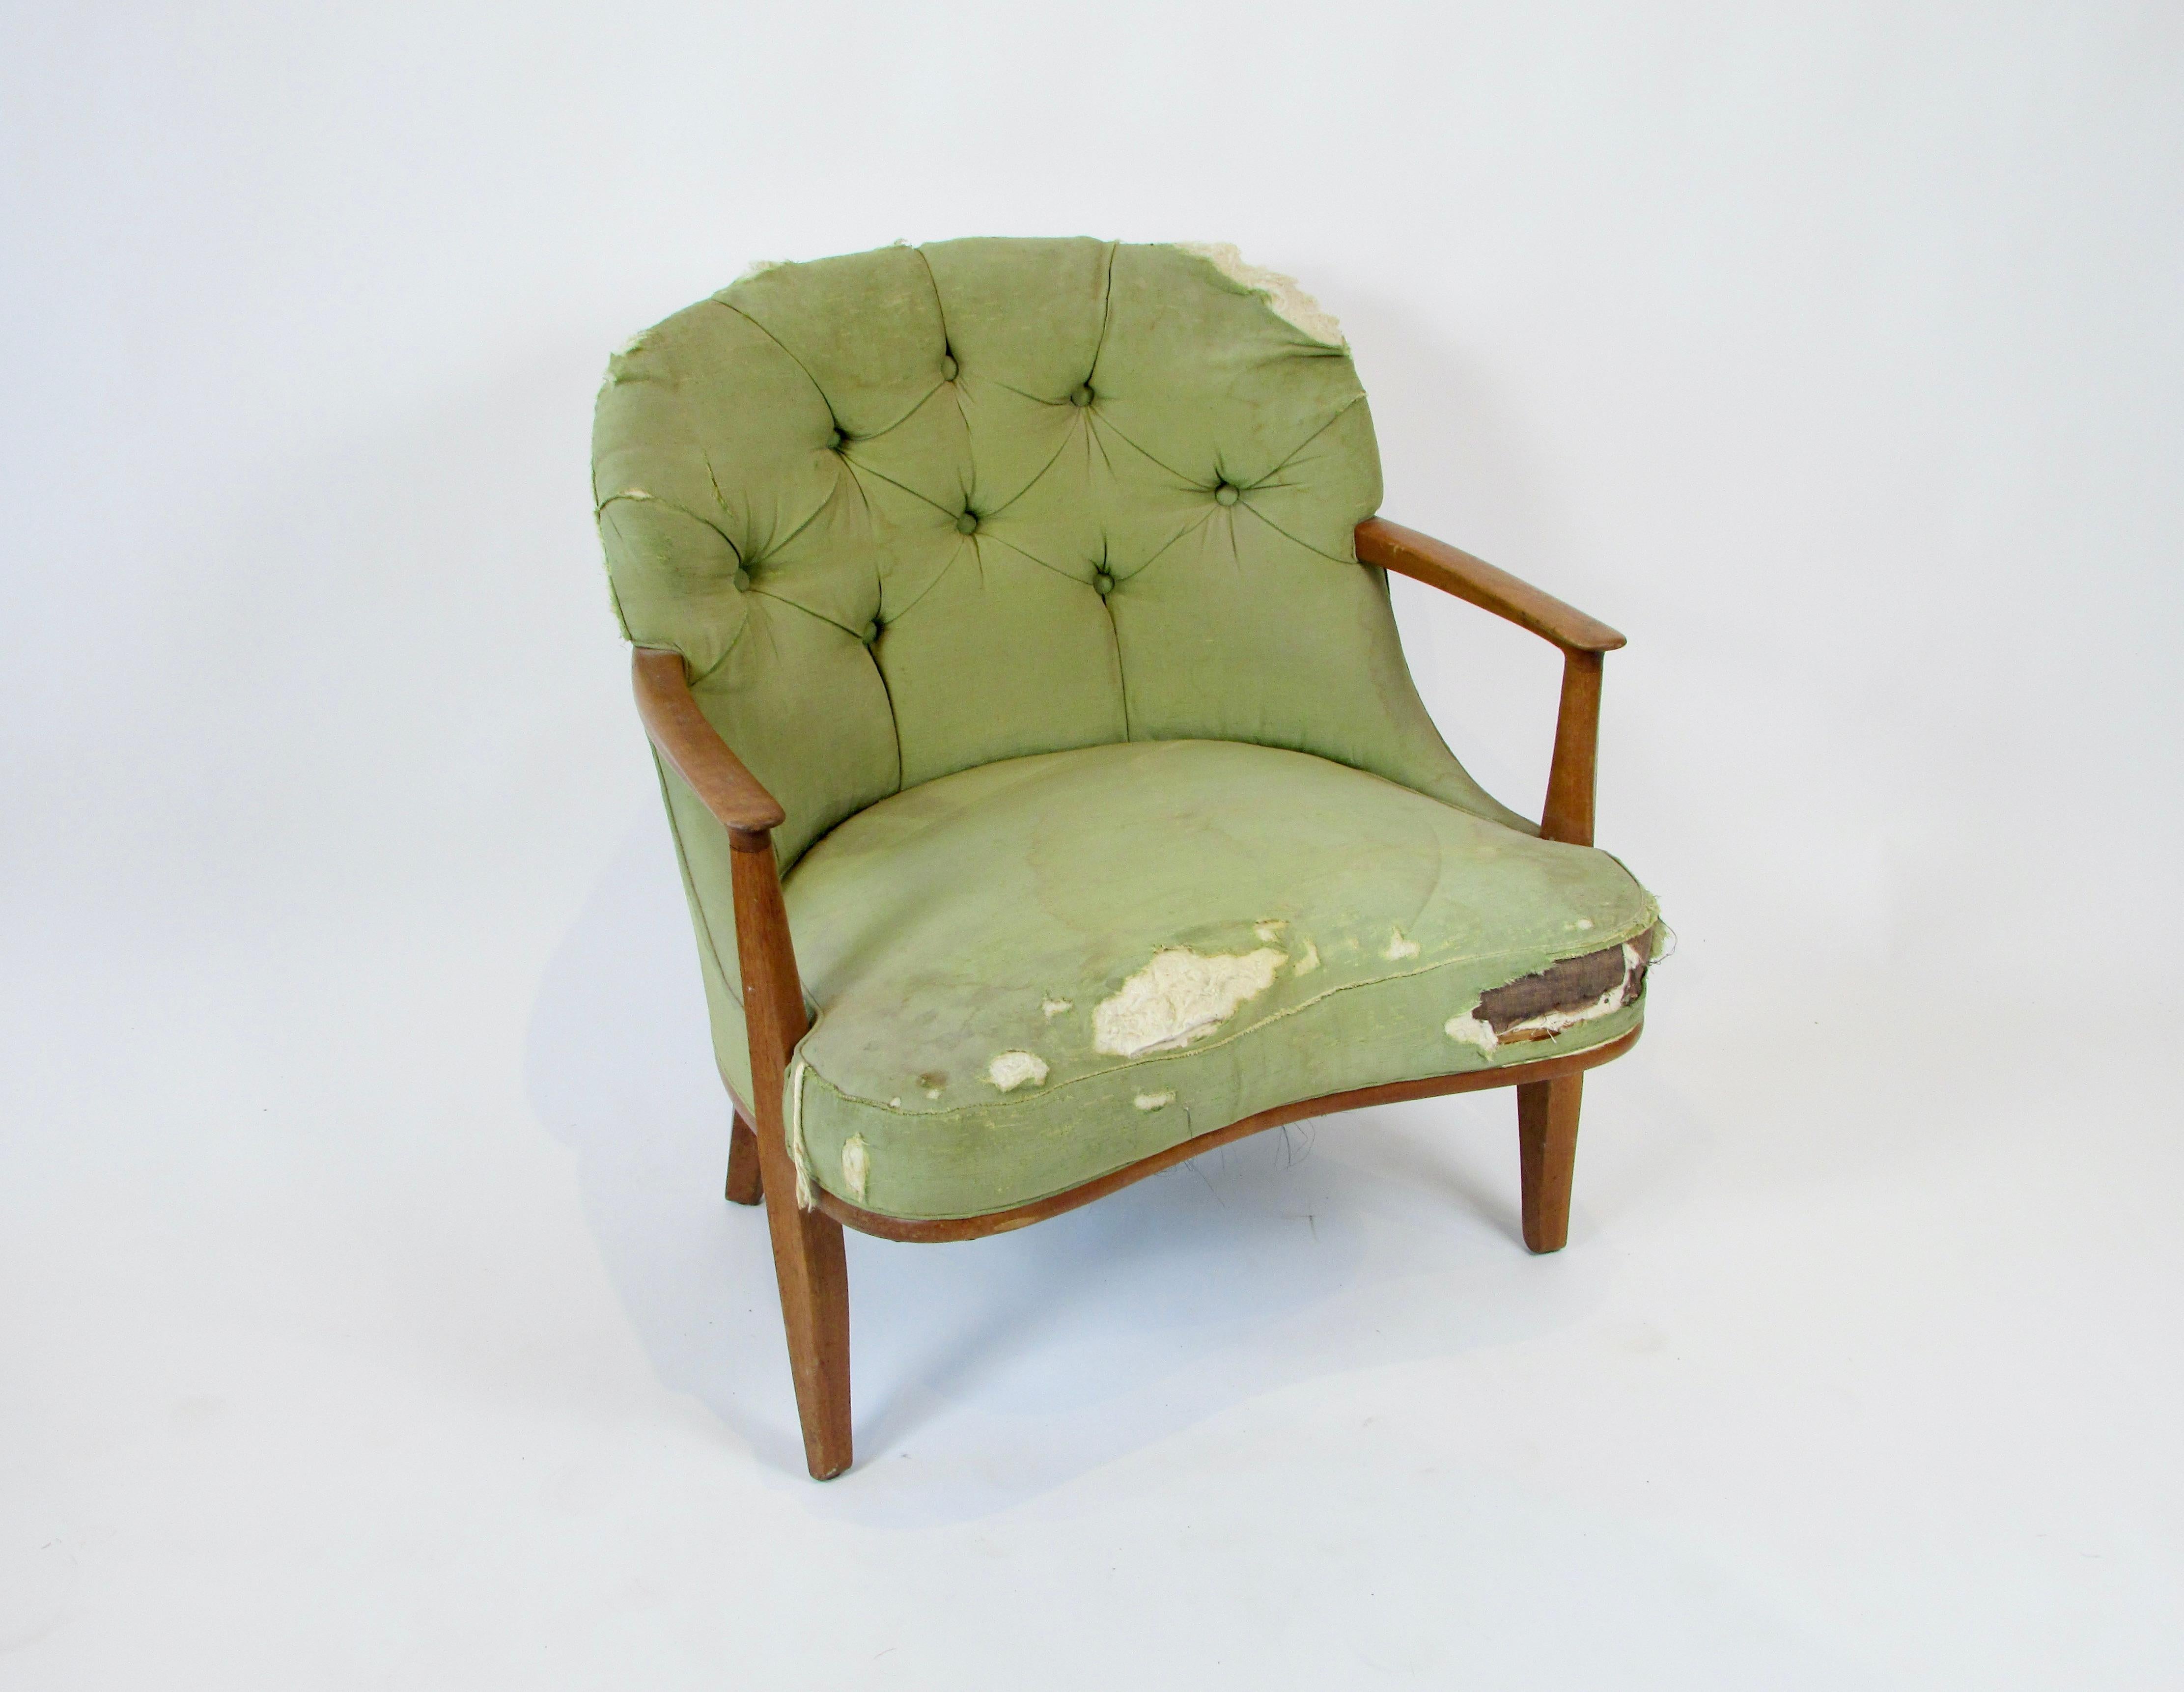 Edward Wormley for Dunbar Janus chair . Selling in as found original worn fabric . Structurally sound ready for clients textile . More economical than buying a finished chair and sending it off to the upholsterer . No need to pay for restoration